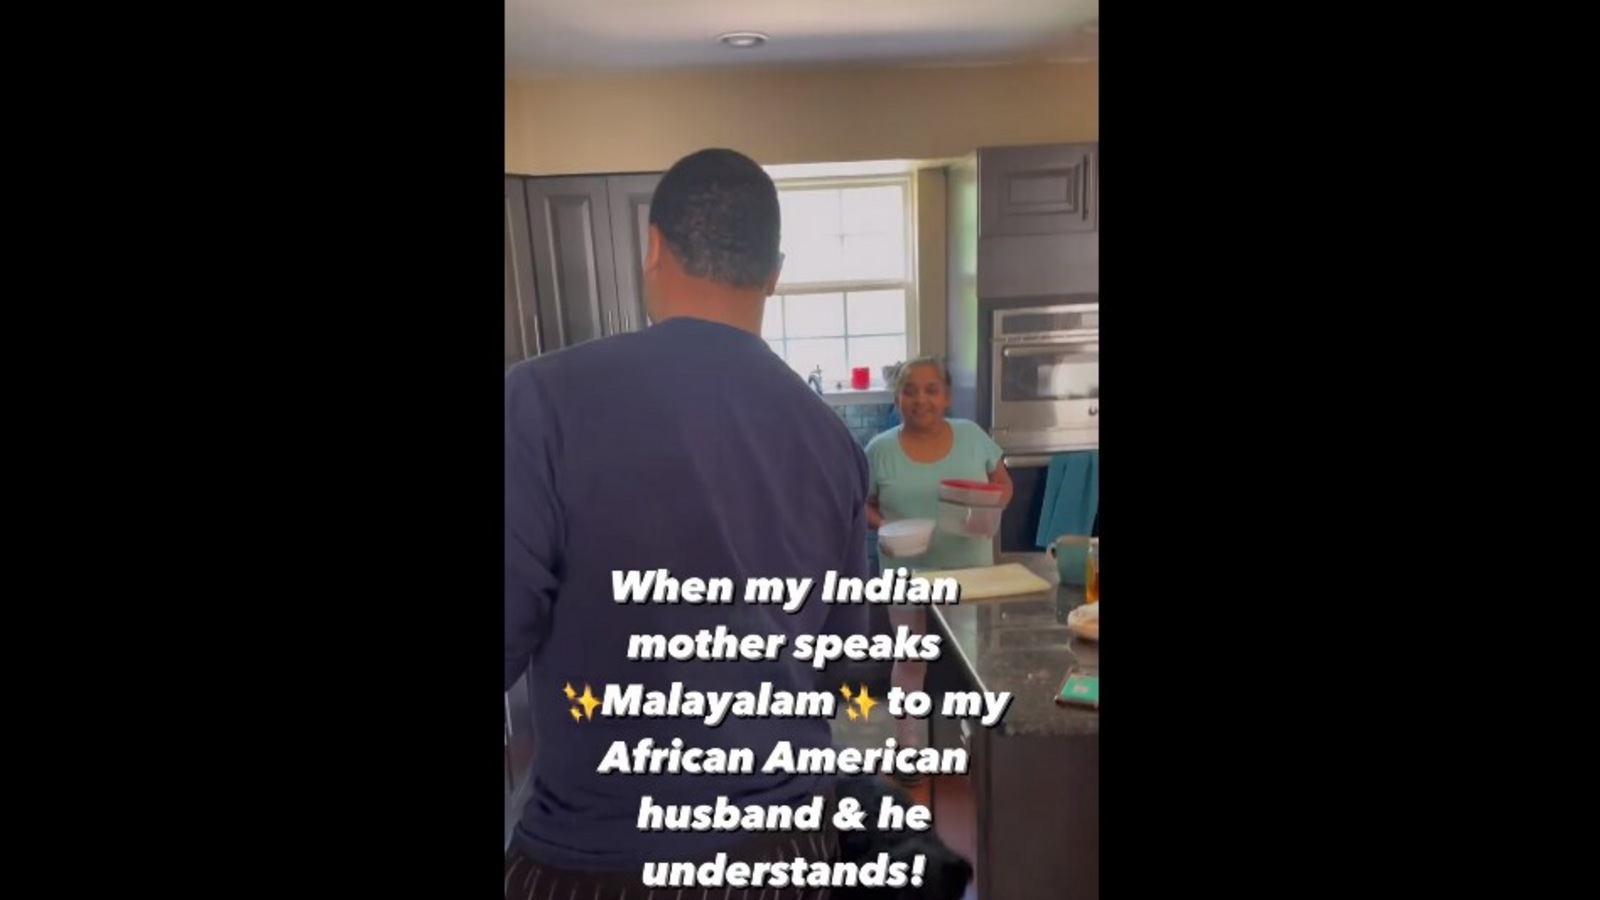 African-American man understands Malayalam spoken by his mother-in-law.  Watch